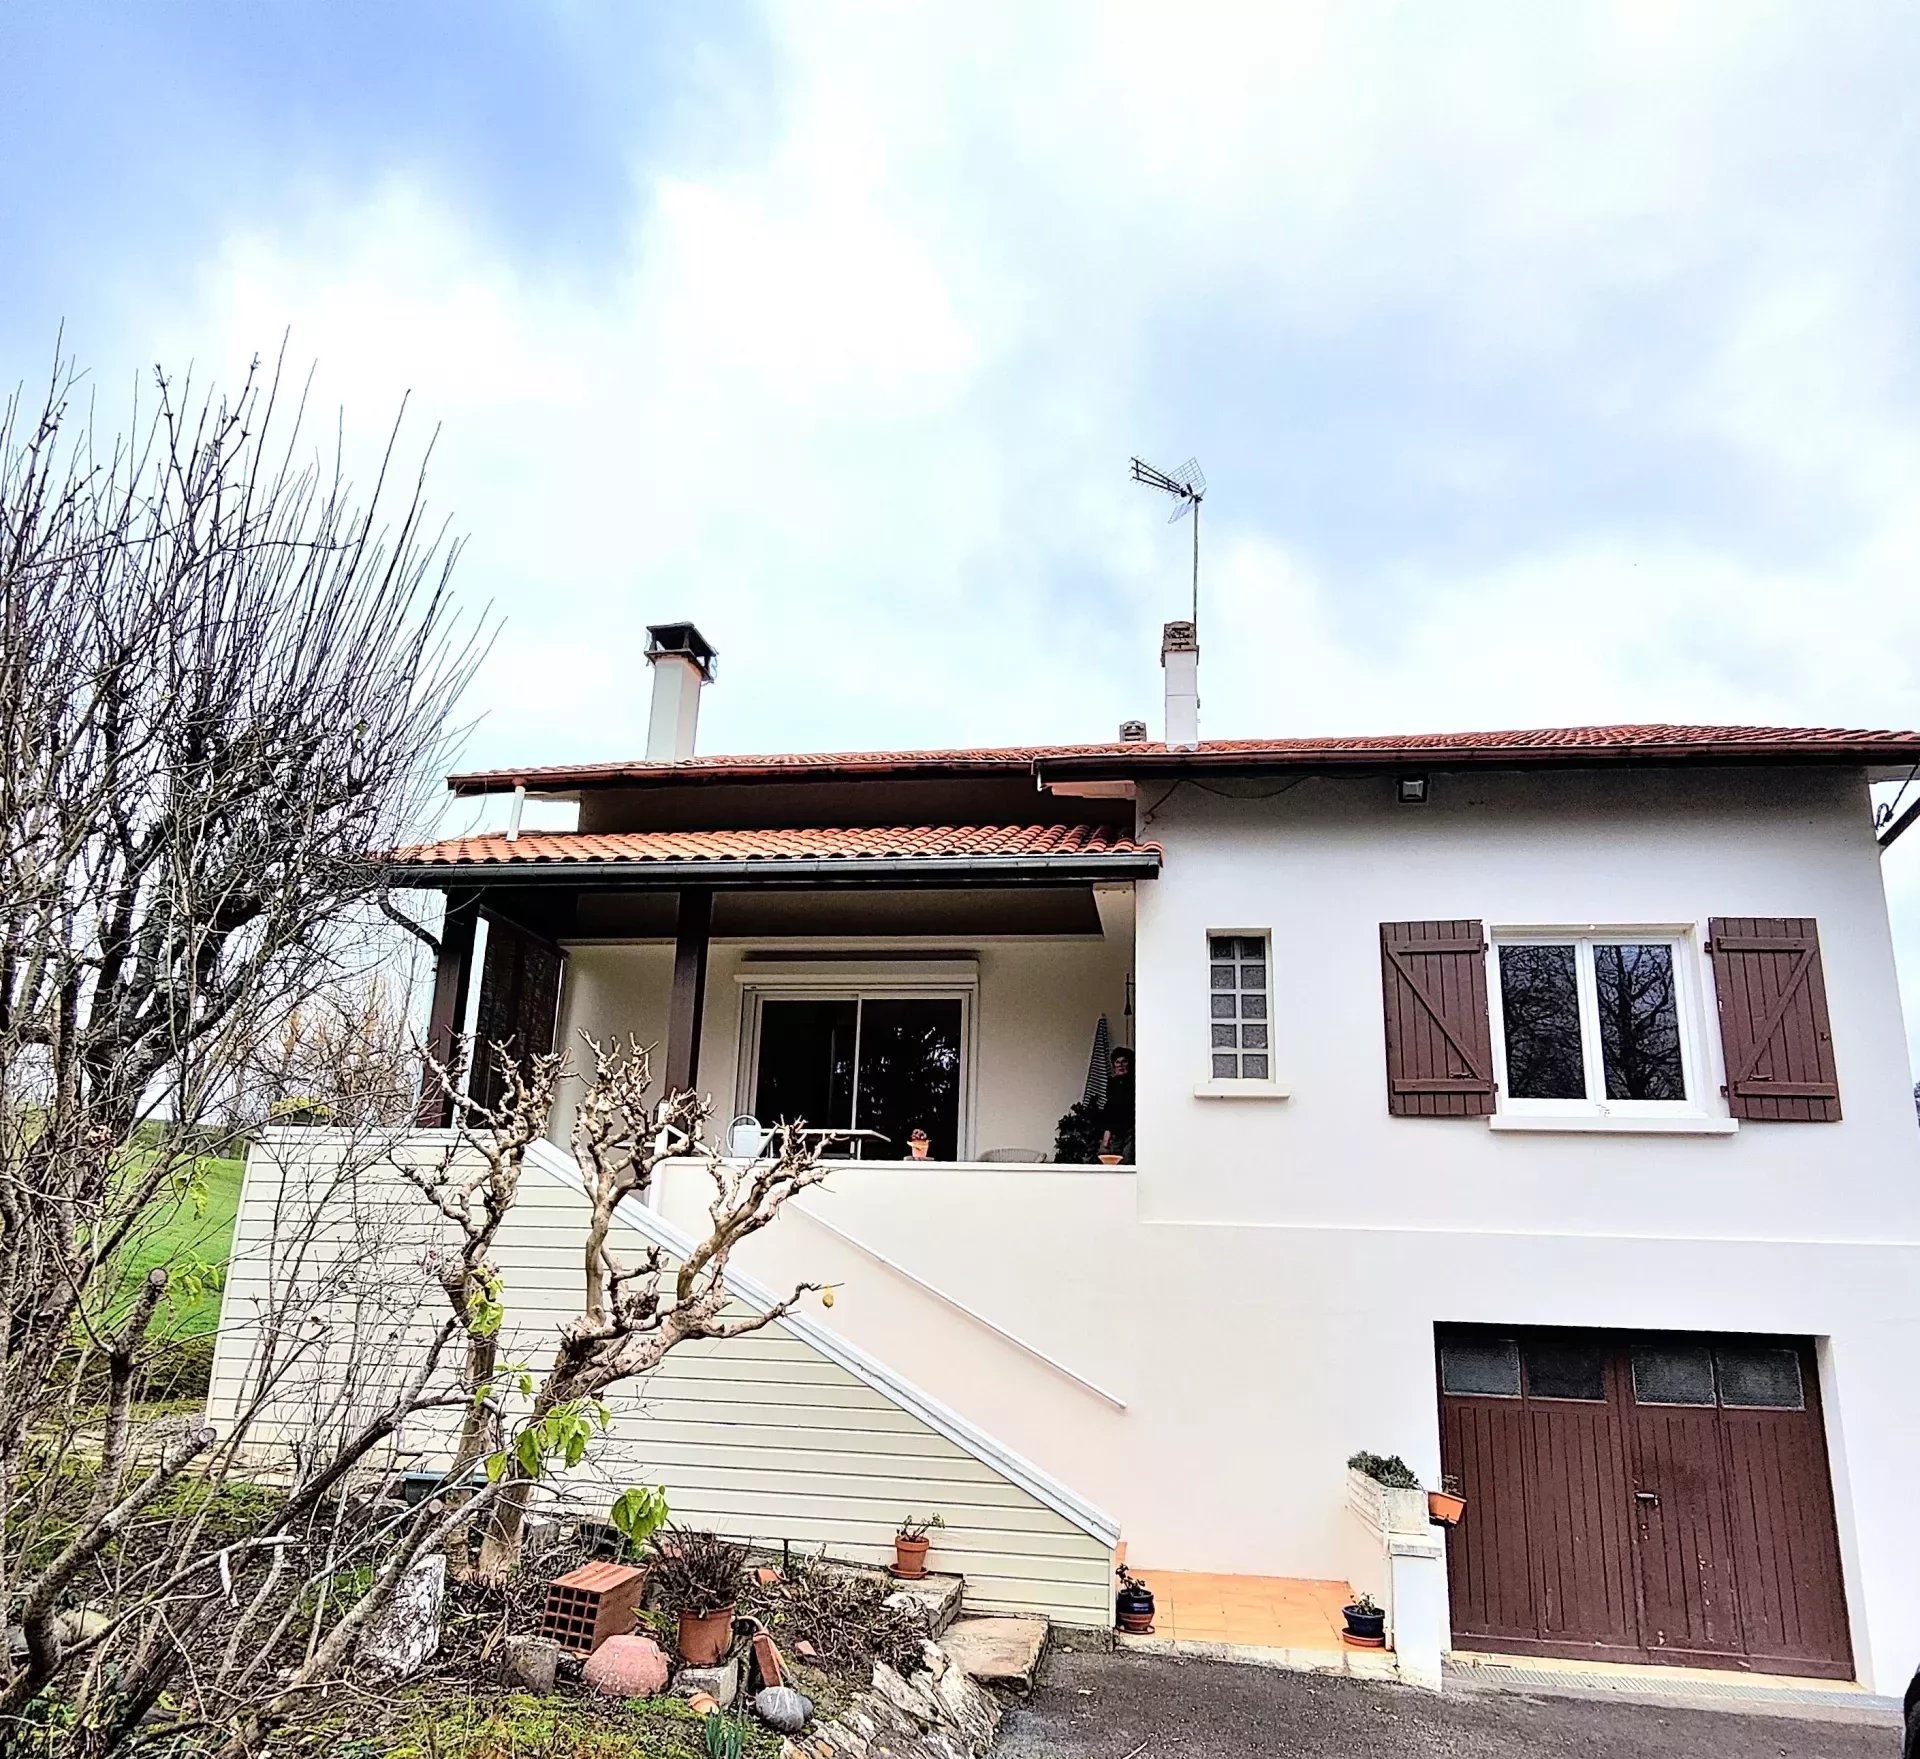 Four-bedroomed house close to town centre with 3500m² of garden